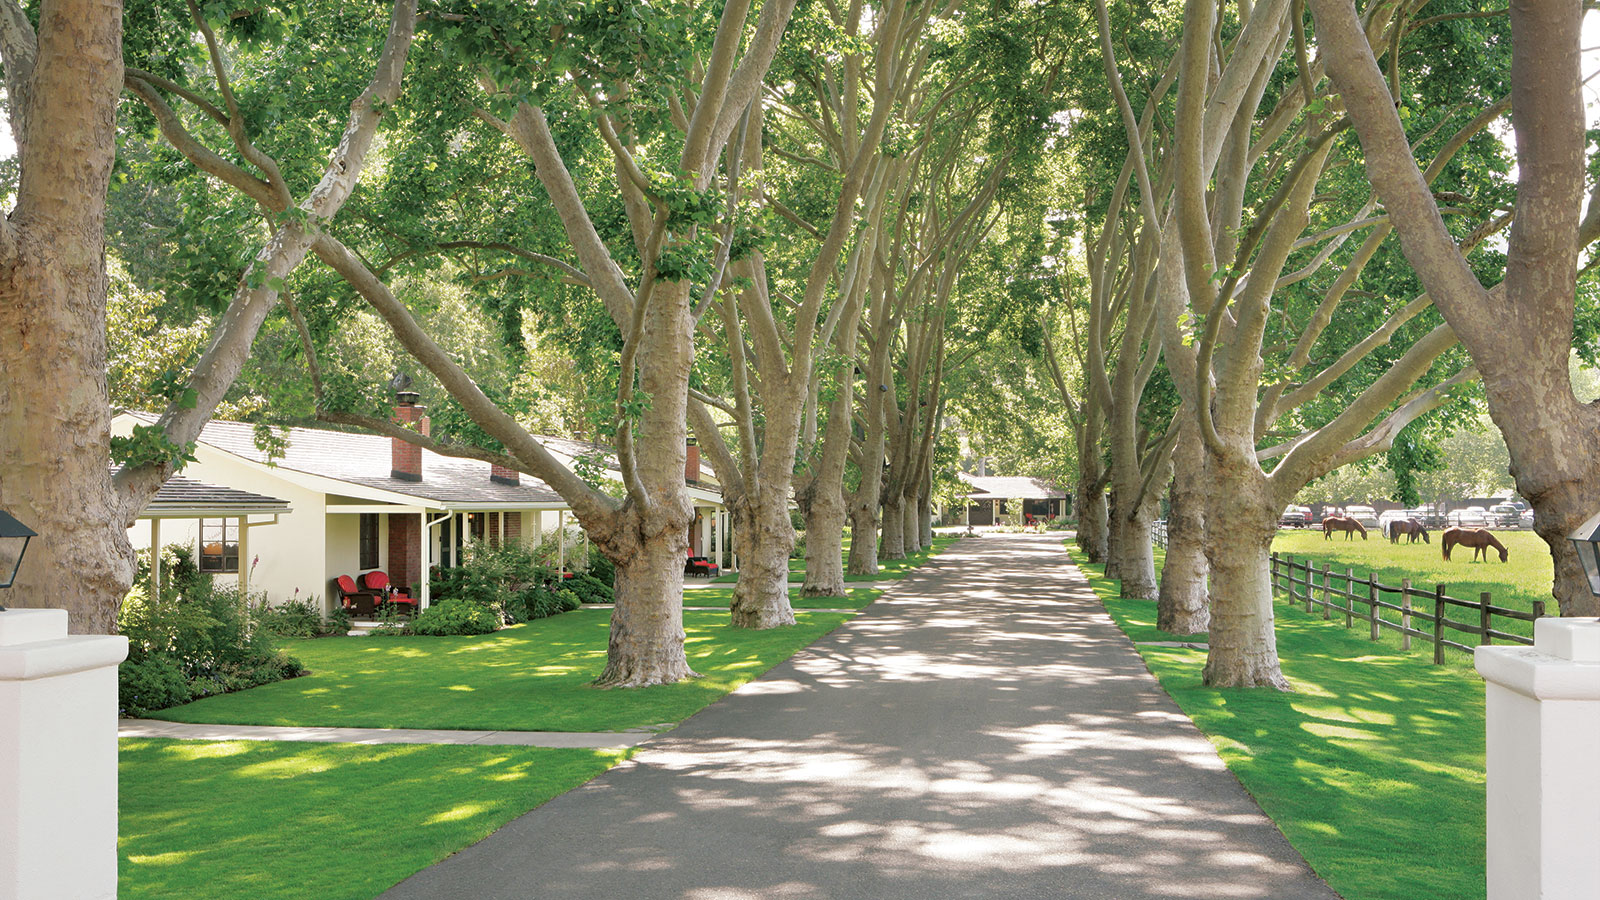 Image of the Front Entrance of The Alisal Guest Ranch & Resort, Overview